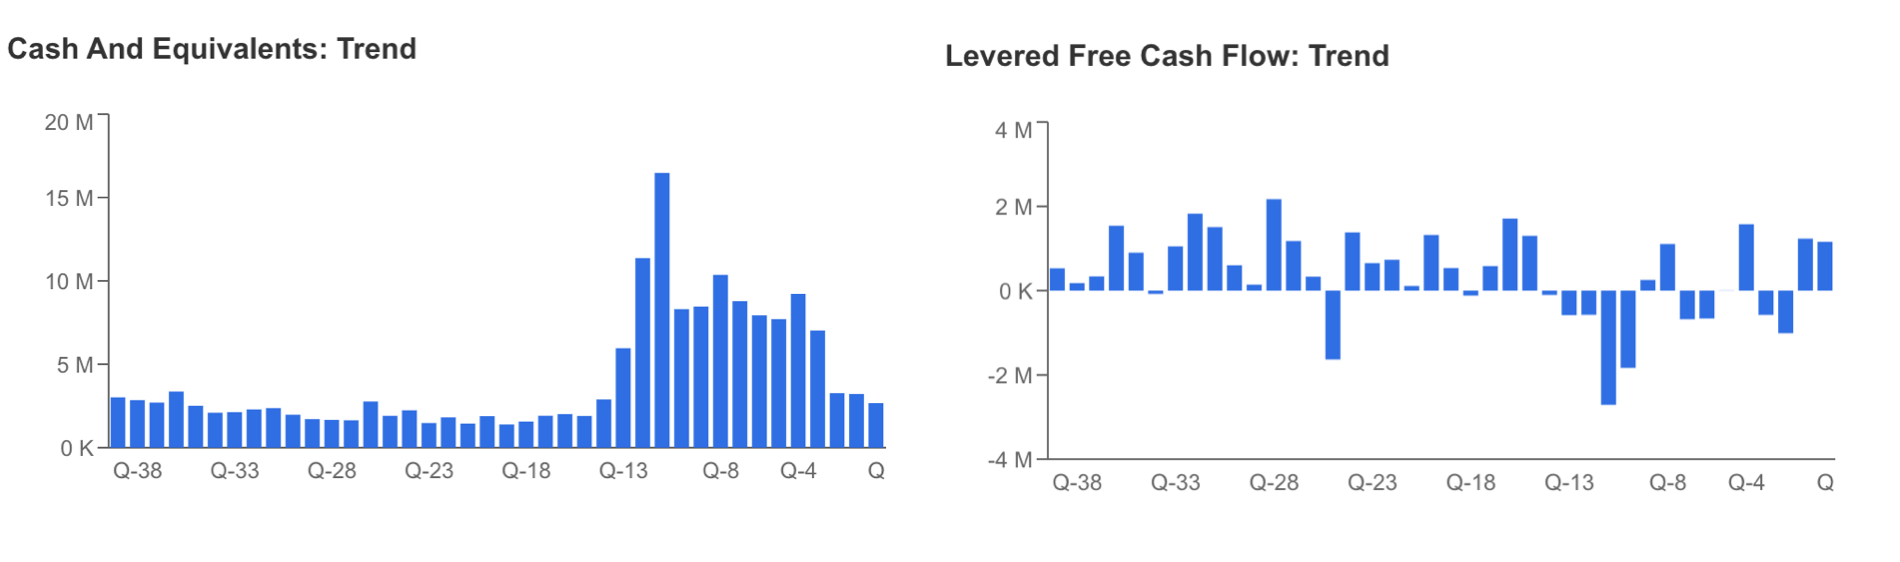 DAL Cash and Levered Free Cashflow Trend